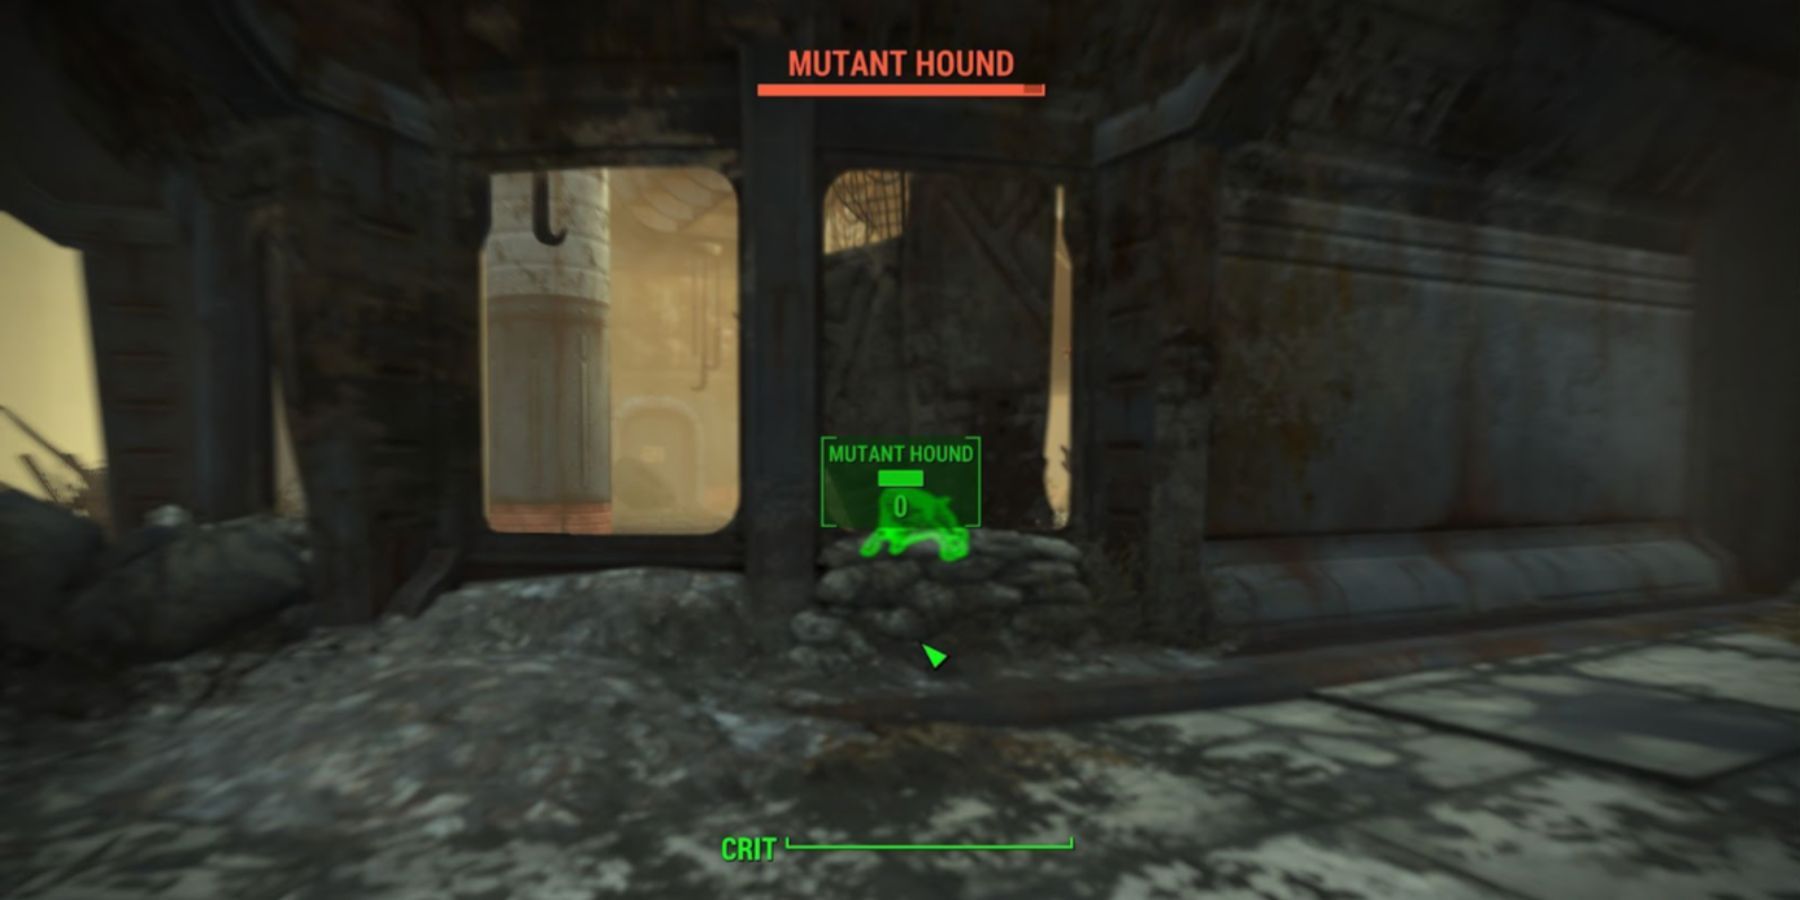 V.A.T.S. in Fallout 4